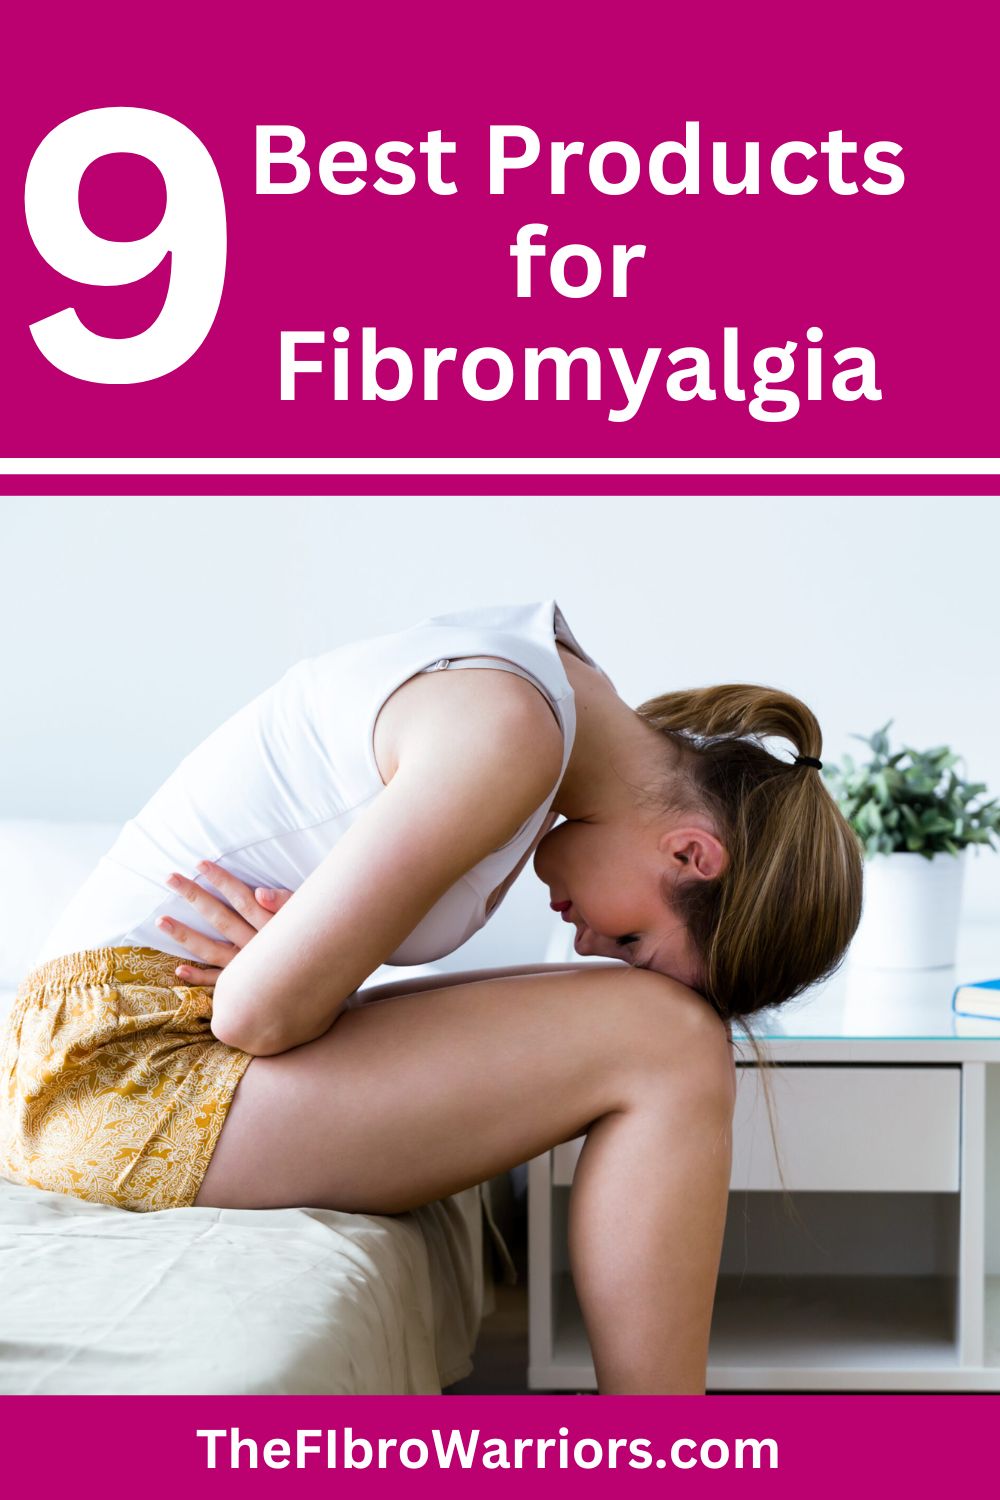 9 Best Products for Fibromyalgia